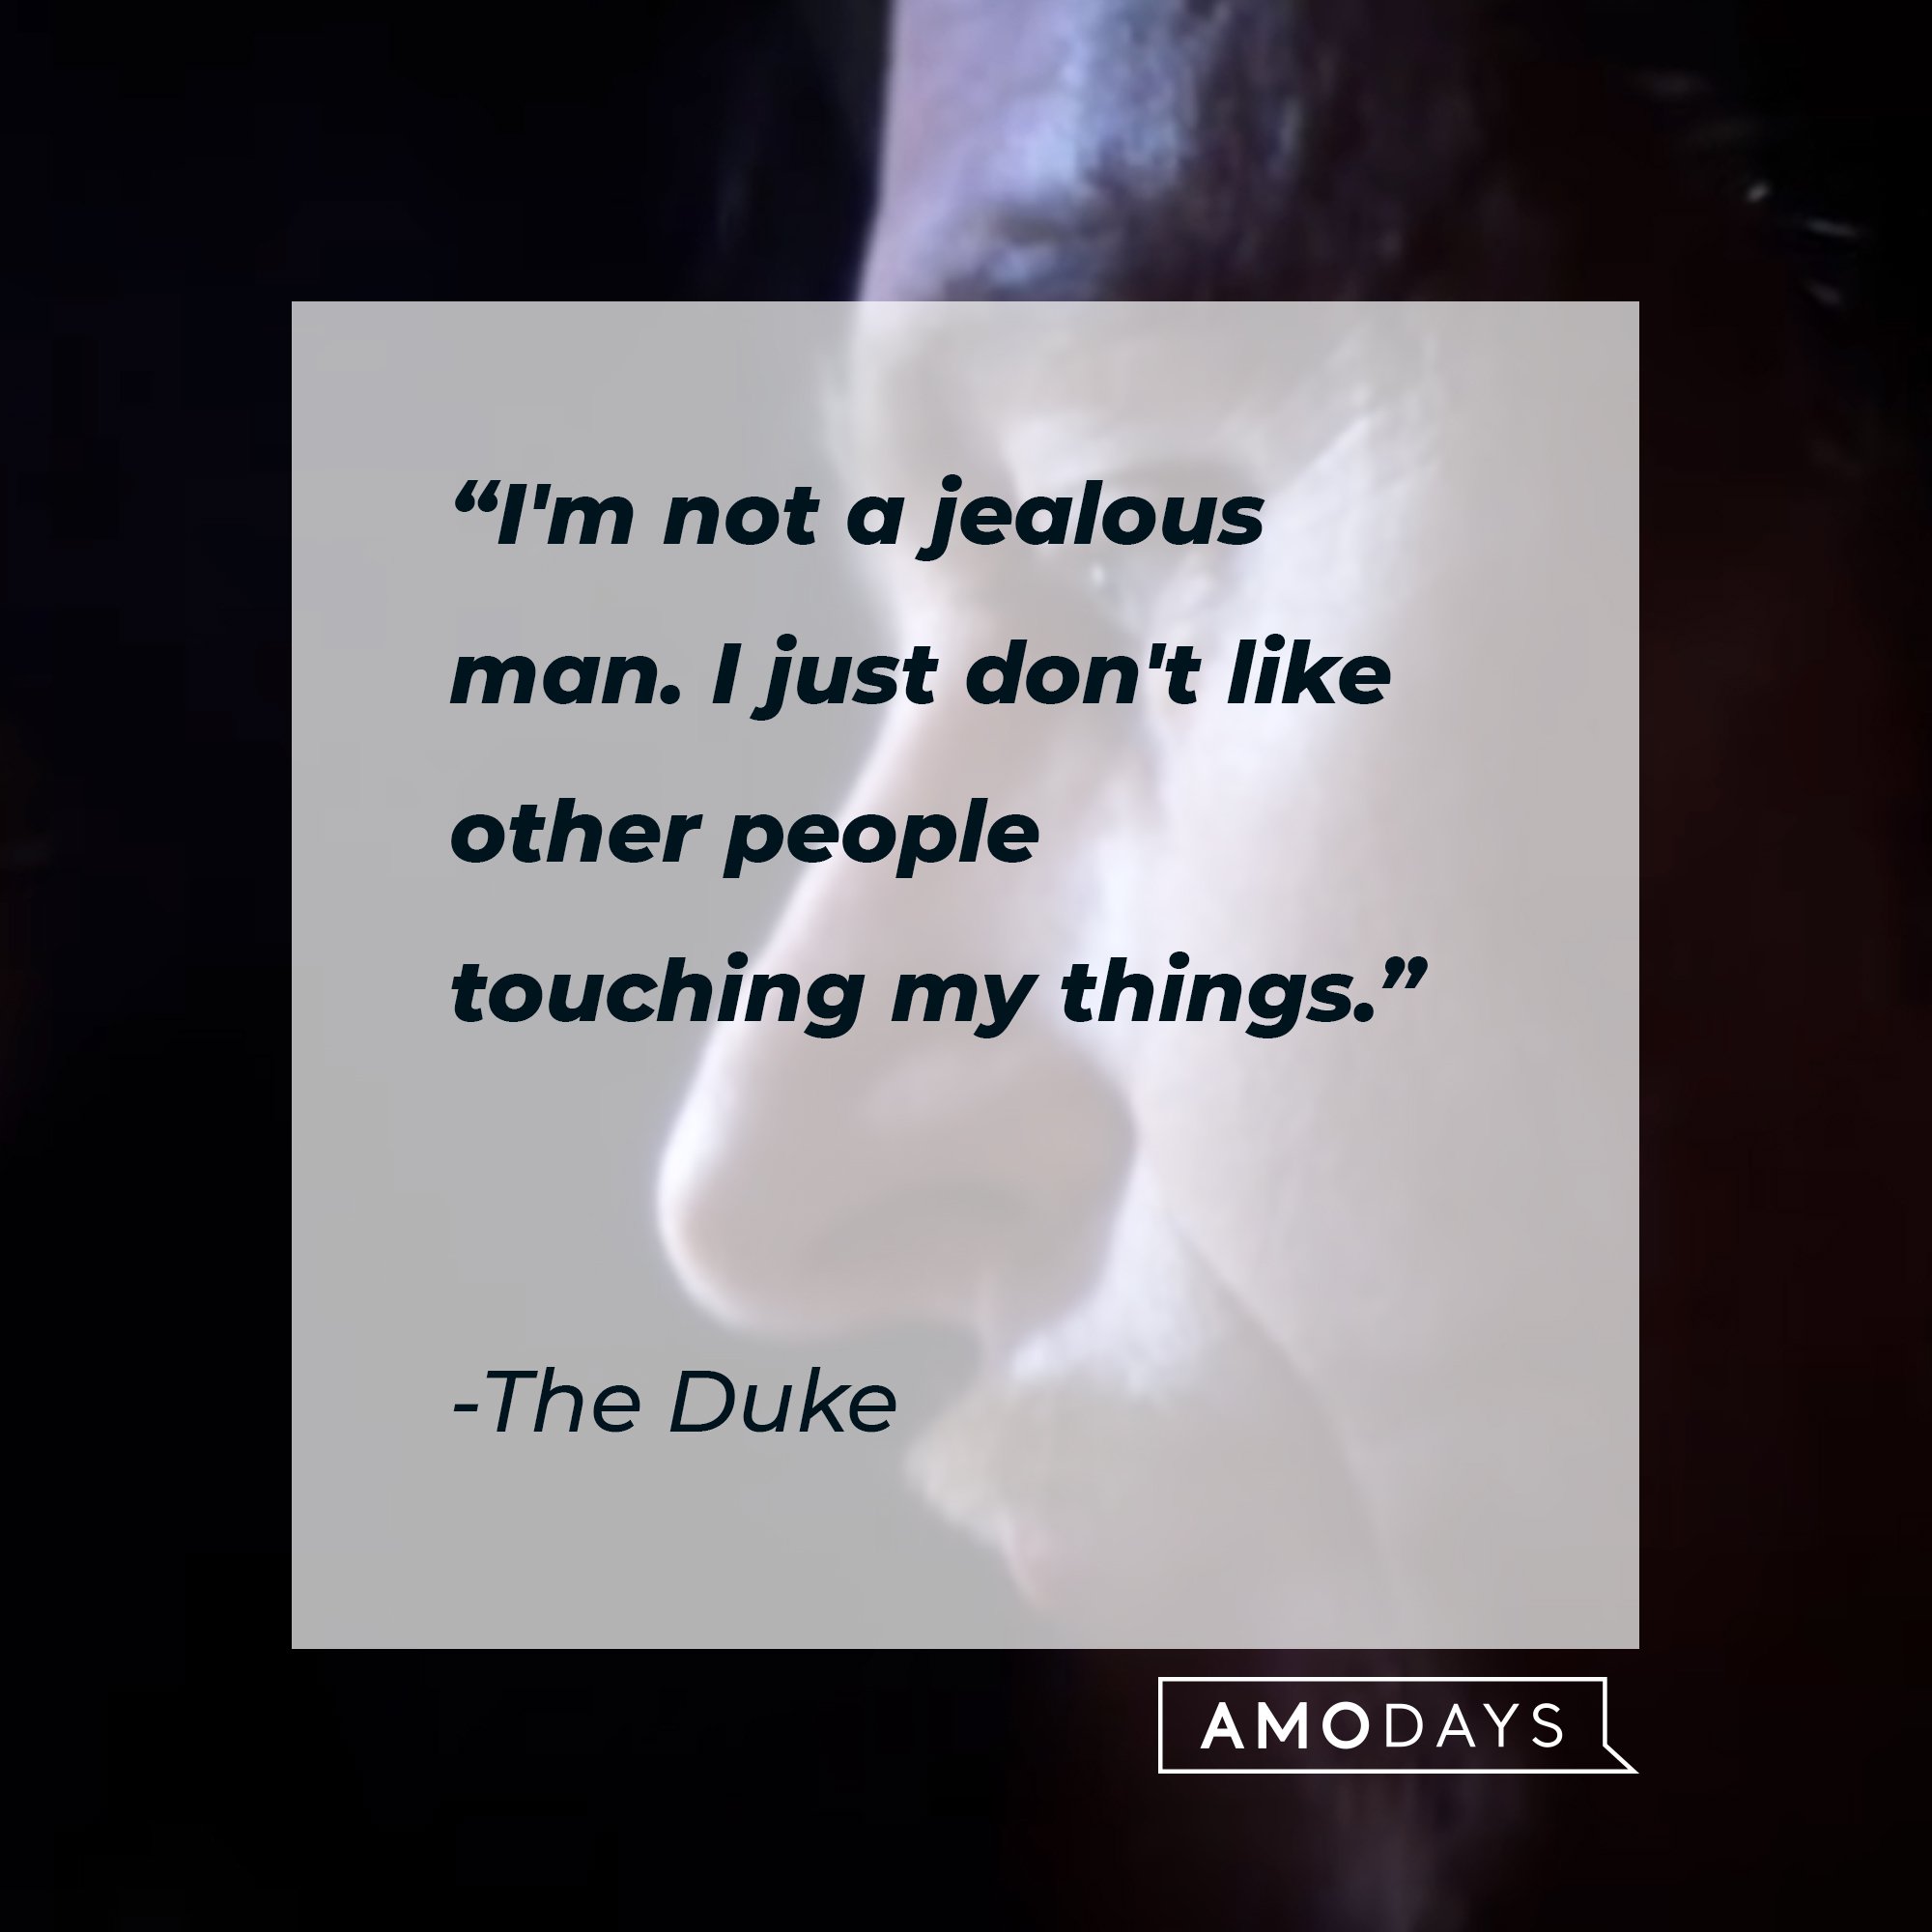 The Duke's quote: "I'm not a jealous man. I just don't like other people touching my things."| Image: AmoDays